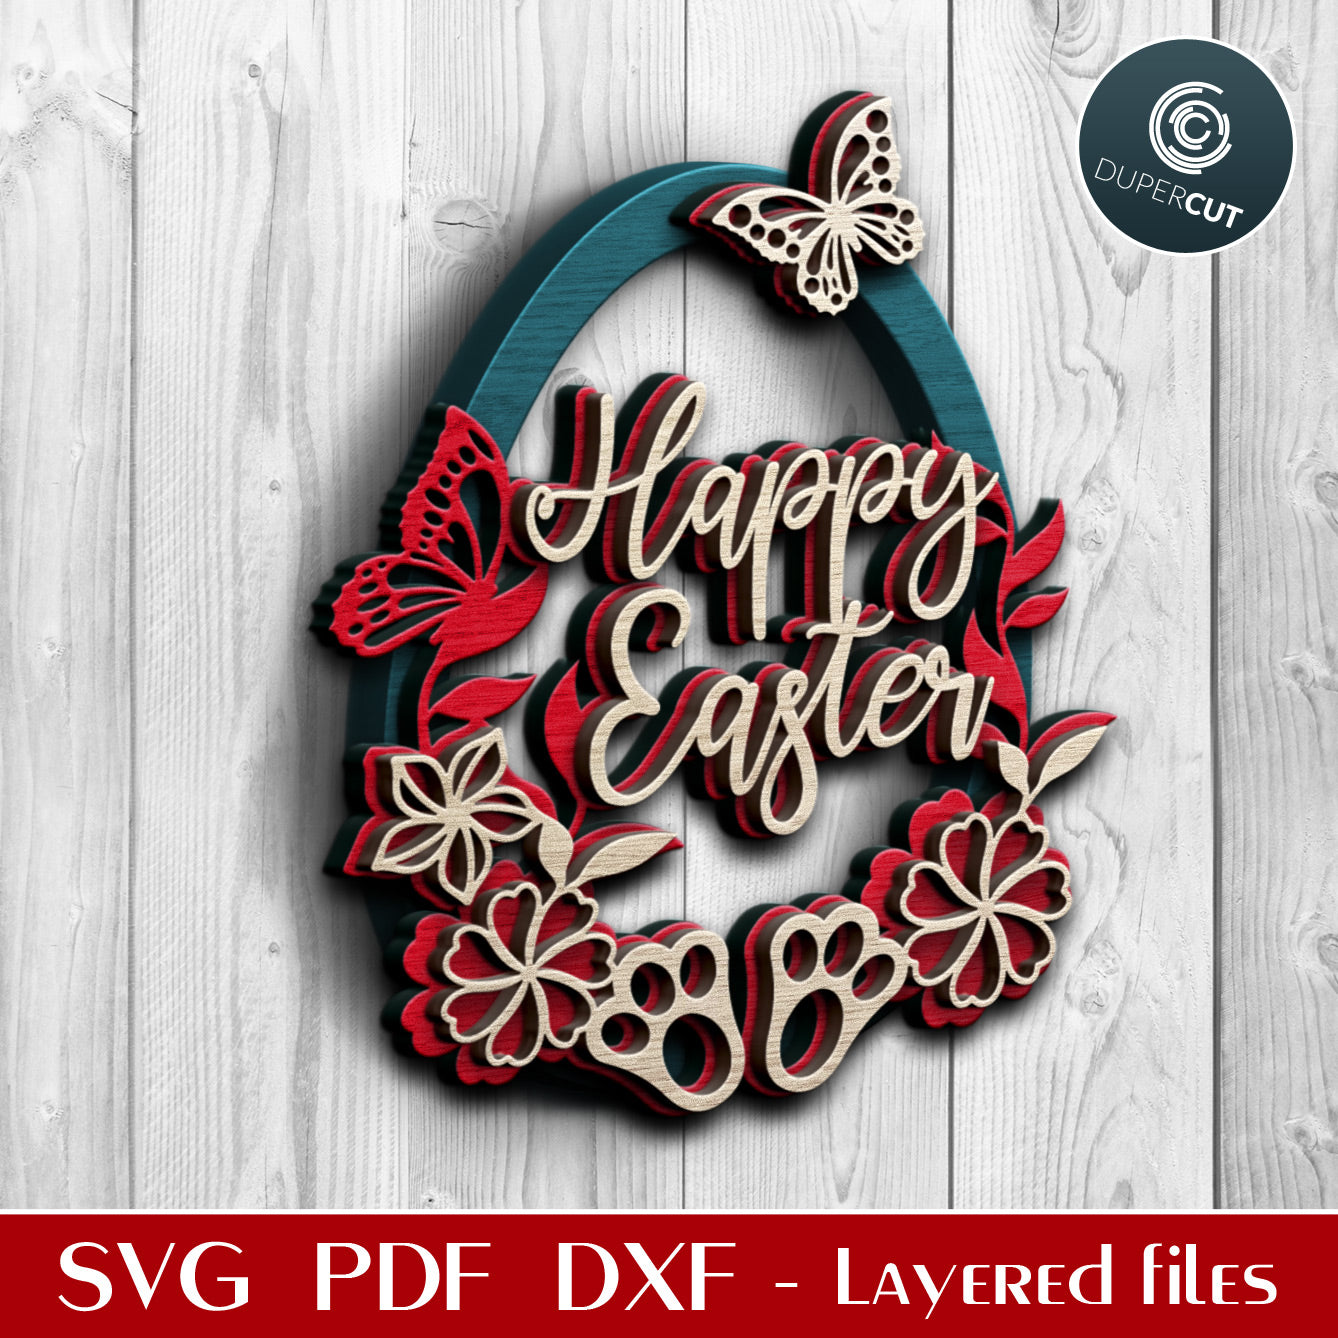 Happy Easter egg - SVG PDF DXF layered cutting files for Cricut, Silhouette Cameo, Glowforge laser, CNC plasma machines